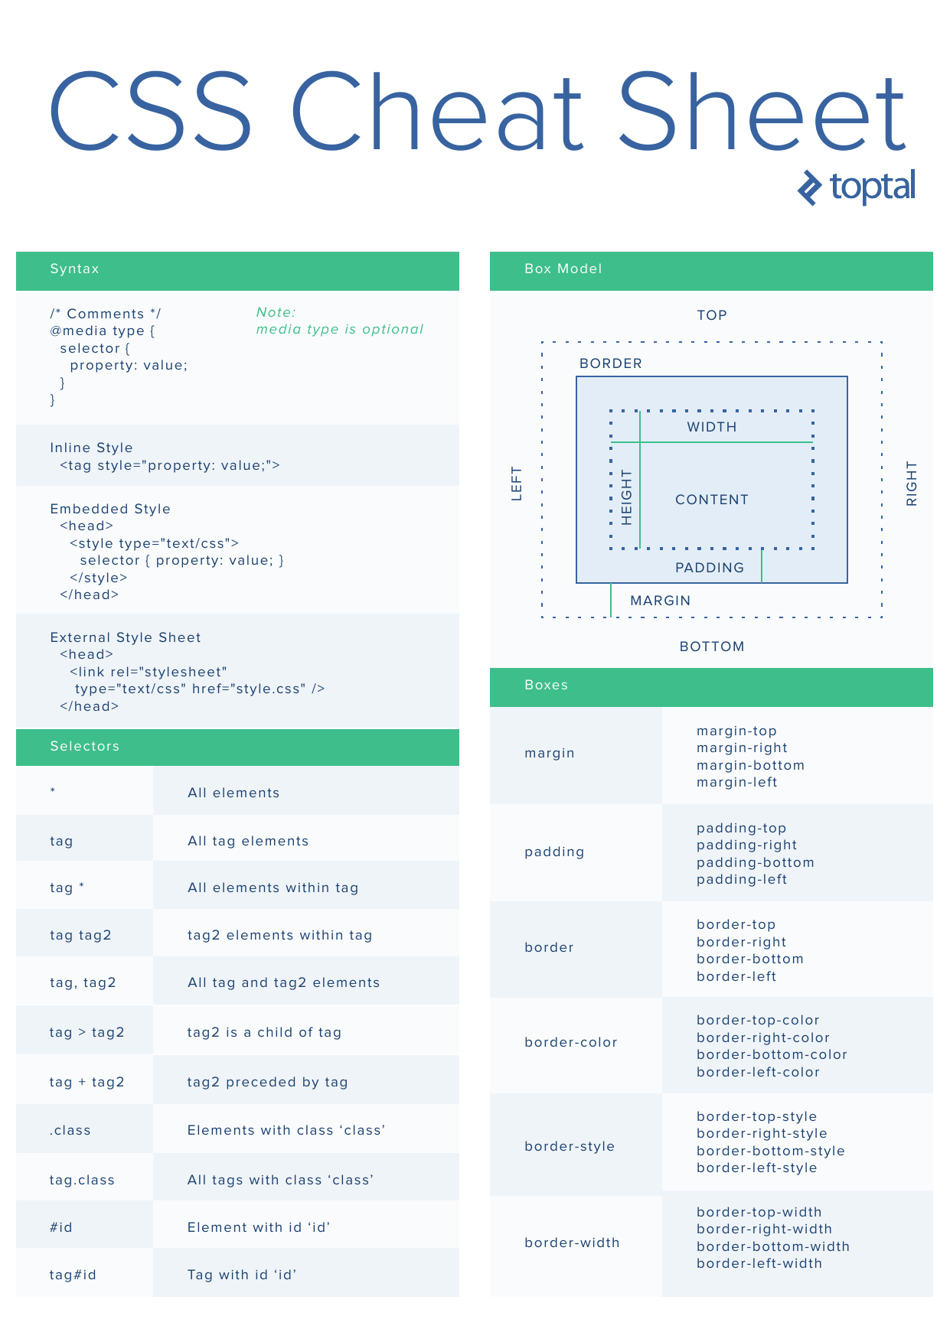 The CSS Cheat Sheet by Toptal at TemplateRoller introduces helpful summary and tips of all important CSS properties and code snippets. Designed to assist web designers and developers, this enduring document aids in mastering CSS syntax, selectors, box model, positioning, fonts, colors, flexbox, grid layout, media queries, and much more.